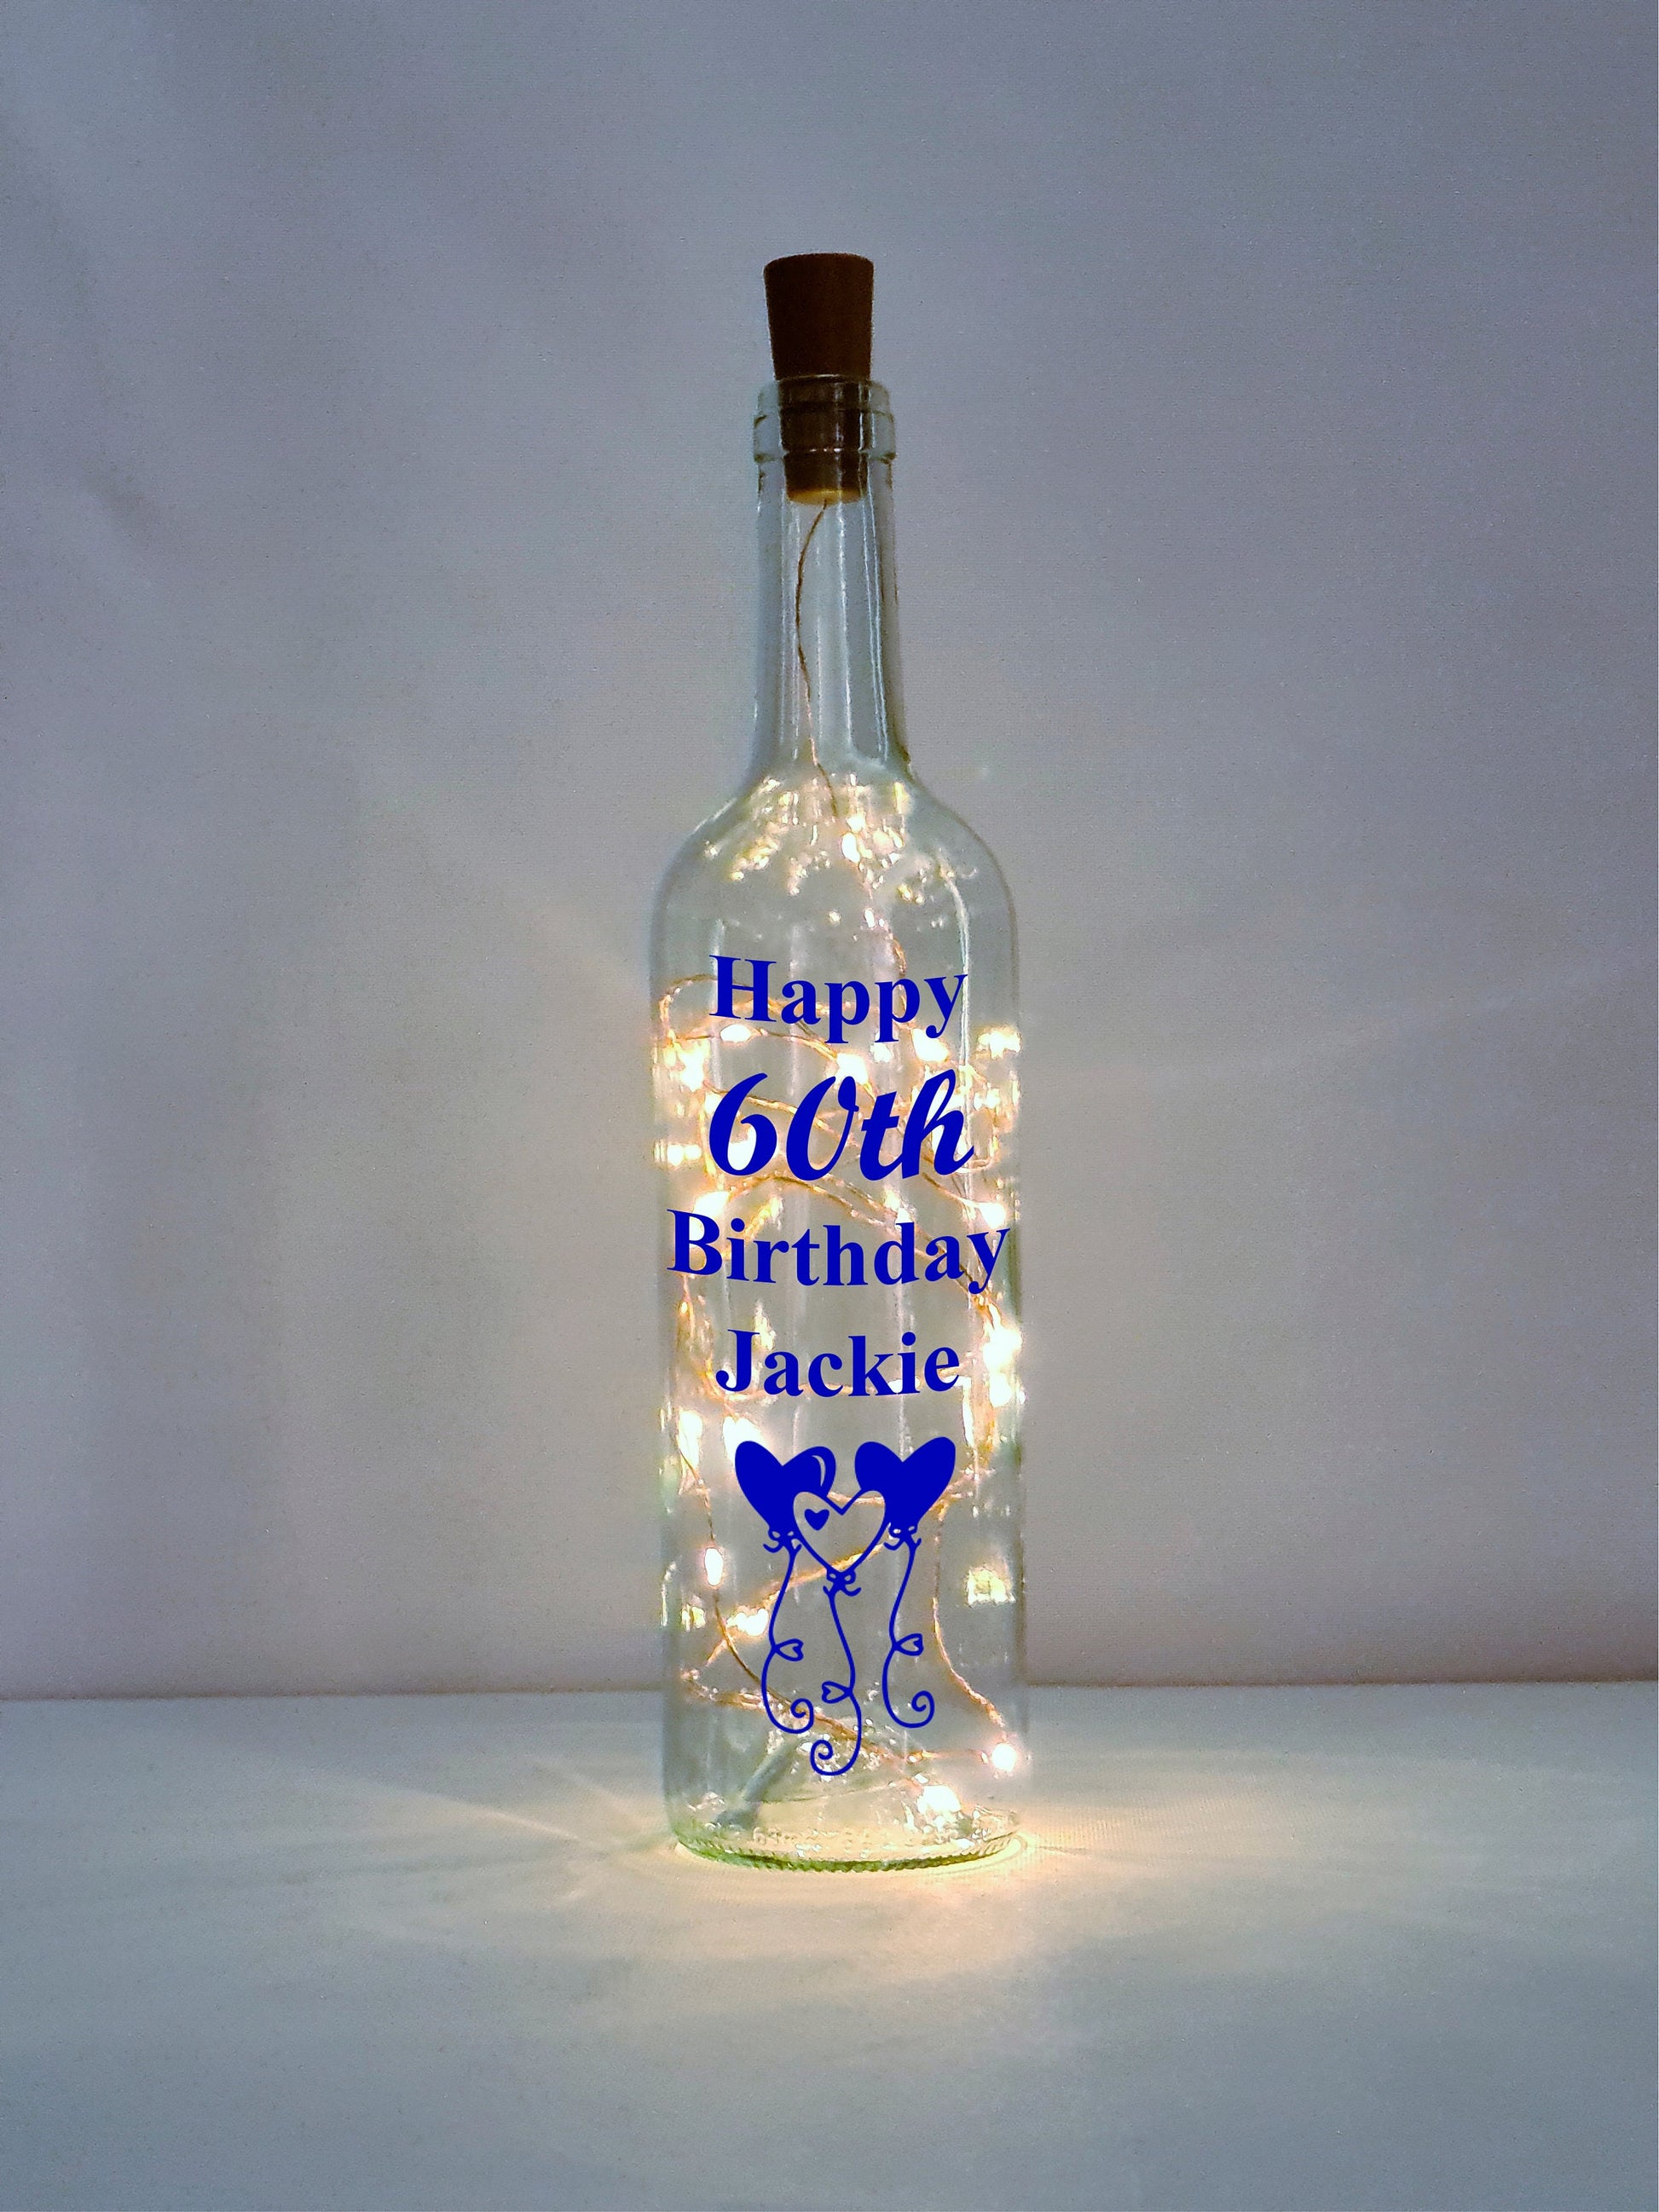 Personalised 60th Birthday Gift For Her, Light Up Balloon Wine Bottle, Birthday Gift For Woman, Best Friend Present, Mum Birthday Gift, Wife